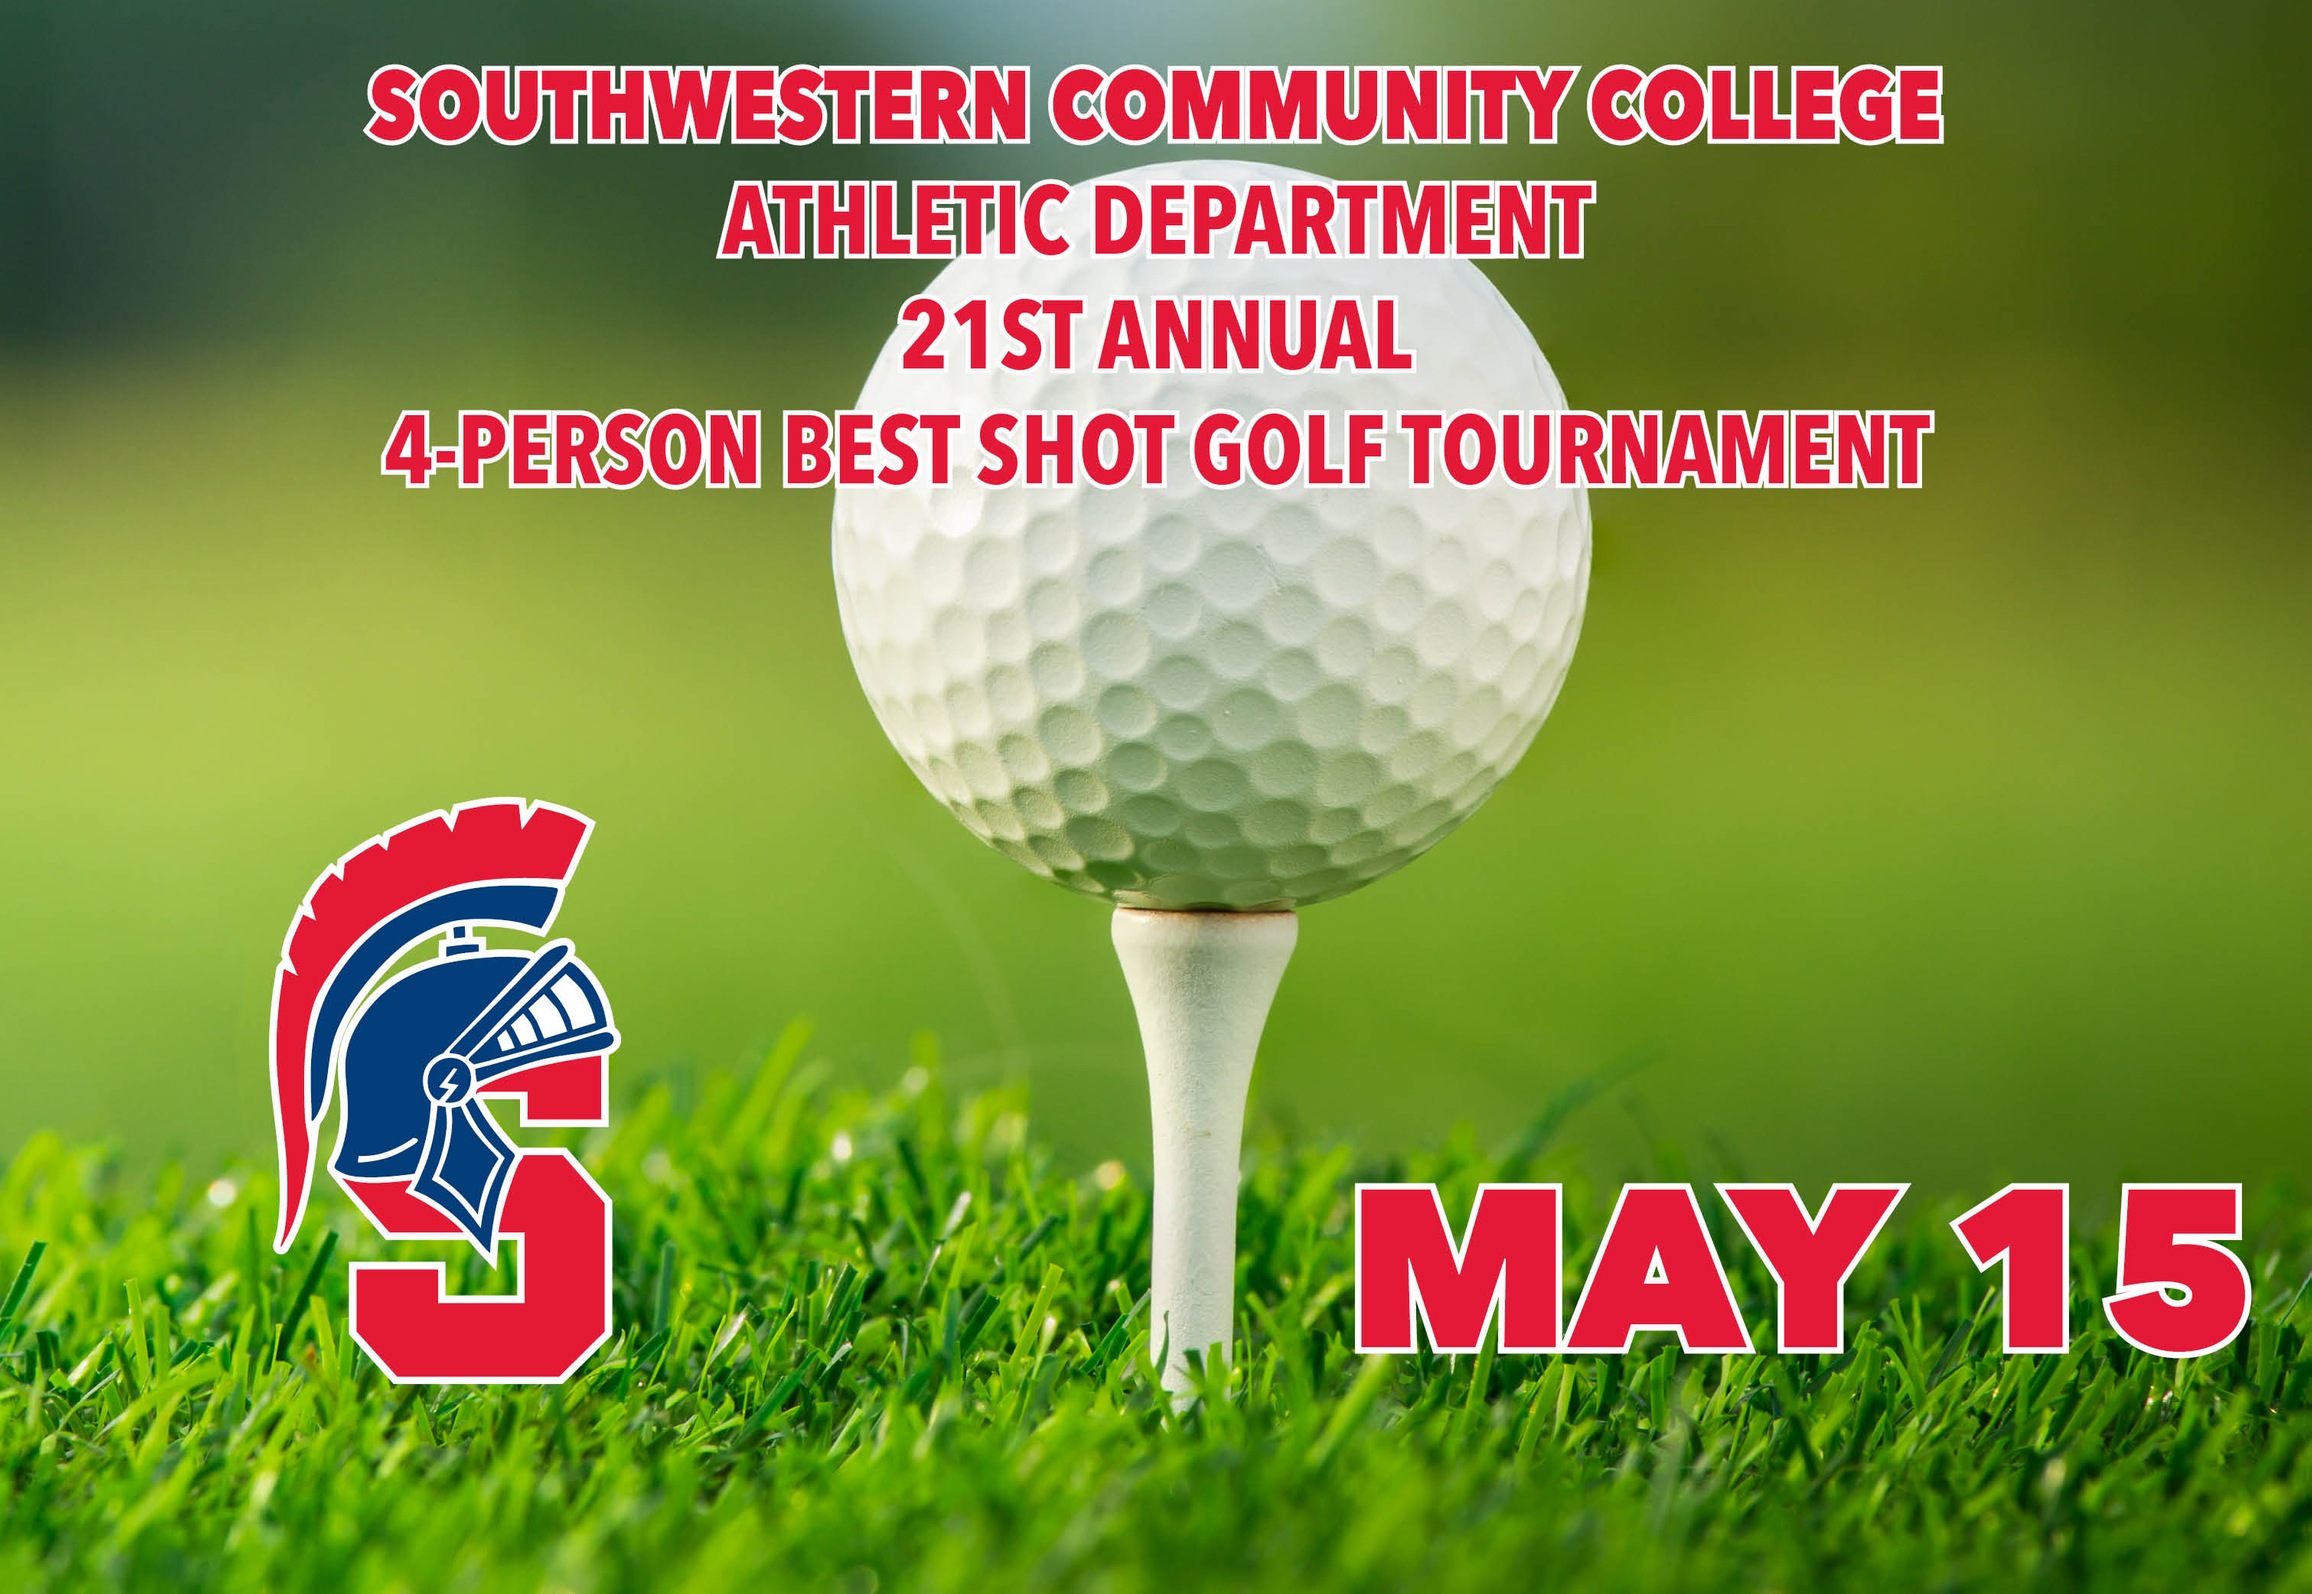 Graphic with Spartan logo and golf ball on tee. Text saying Southwestern Community College Athletic Department 21st Annual 4-Person Best Shot Golf Tournament, May 15